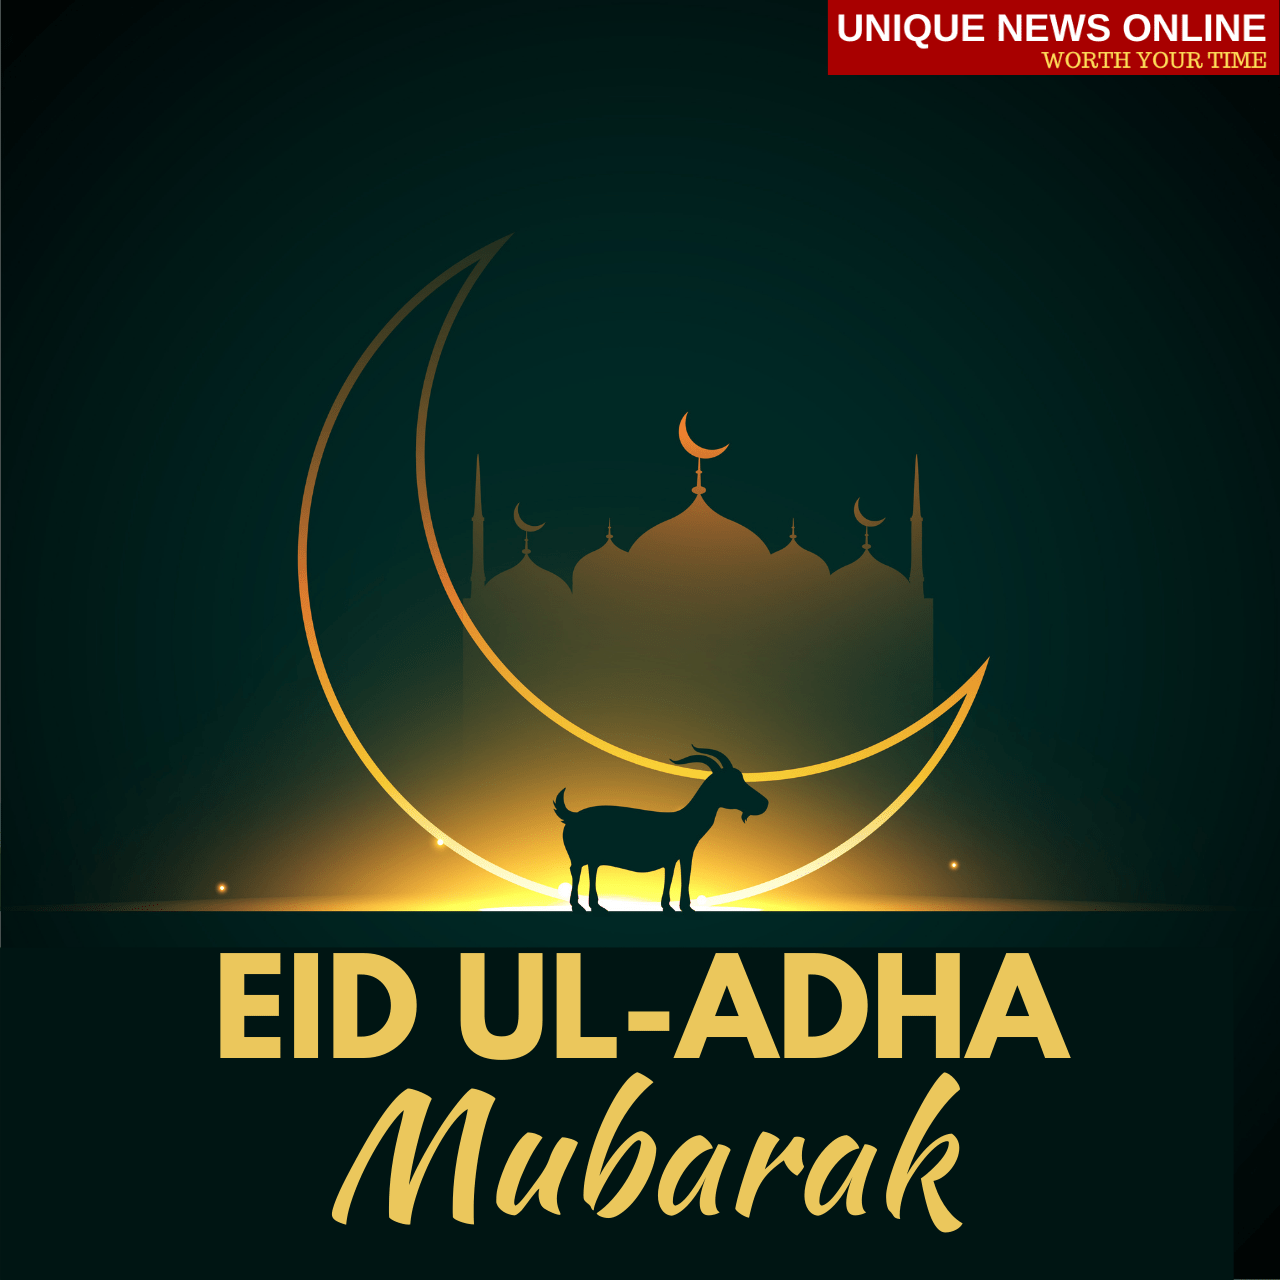 1280x1280 Eid Ul Adha Mubarak 2021 Arabic Wishes, Image, Quotes, Greetings, Status, Messages, And Dua To Greet